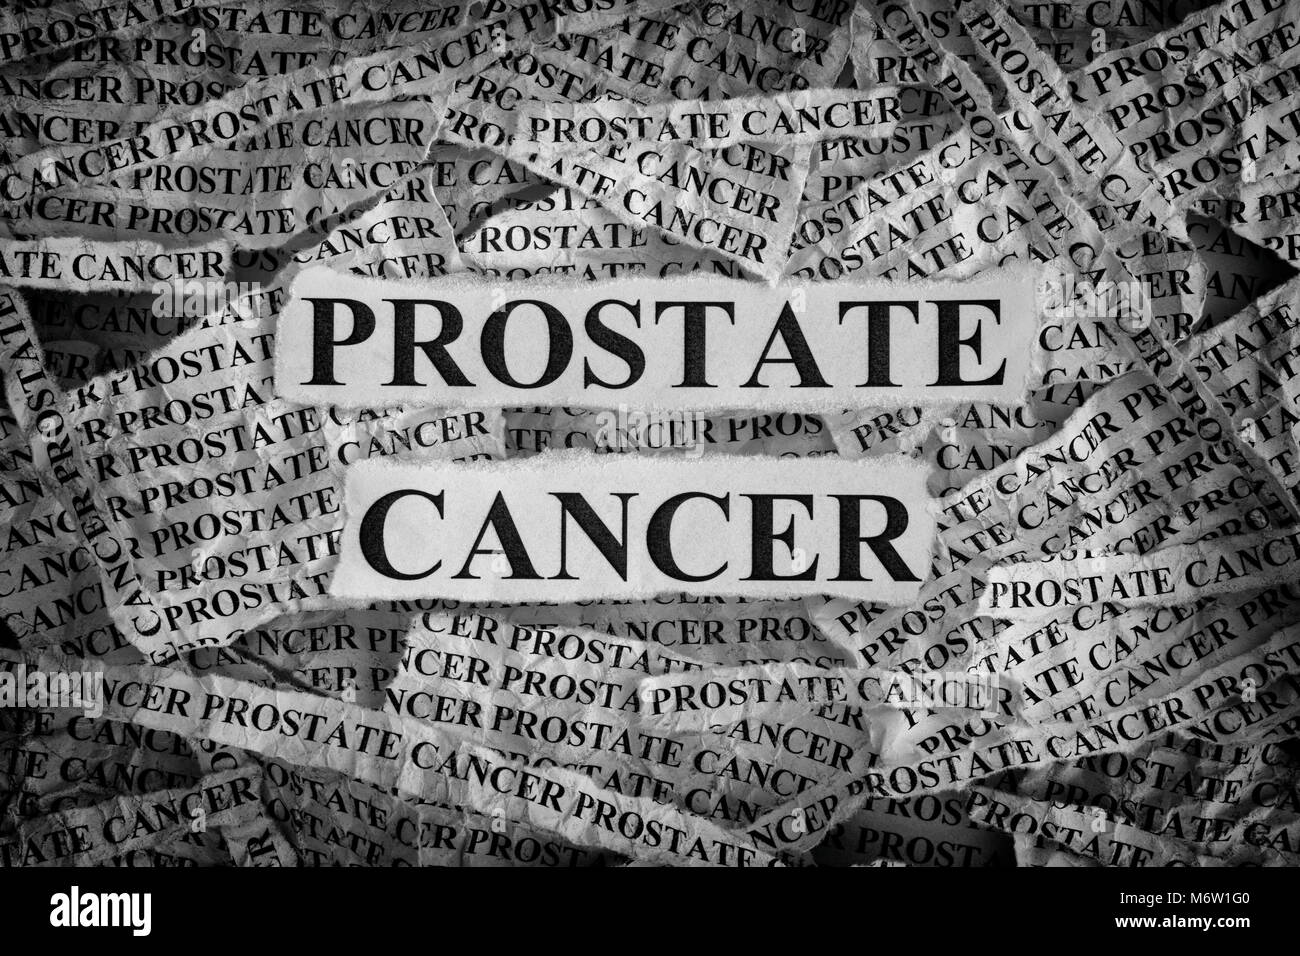 Prostate Cancer. Torn pieces of paper with words Prostate Cancer. Concept Image. Black and White. Closeup. Stock Photo